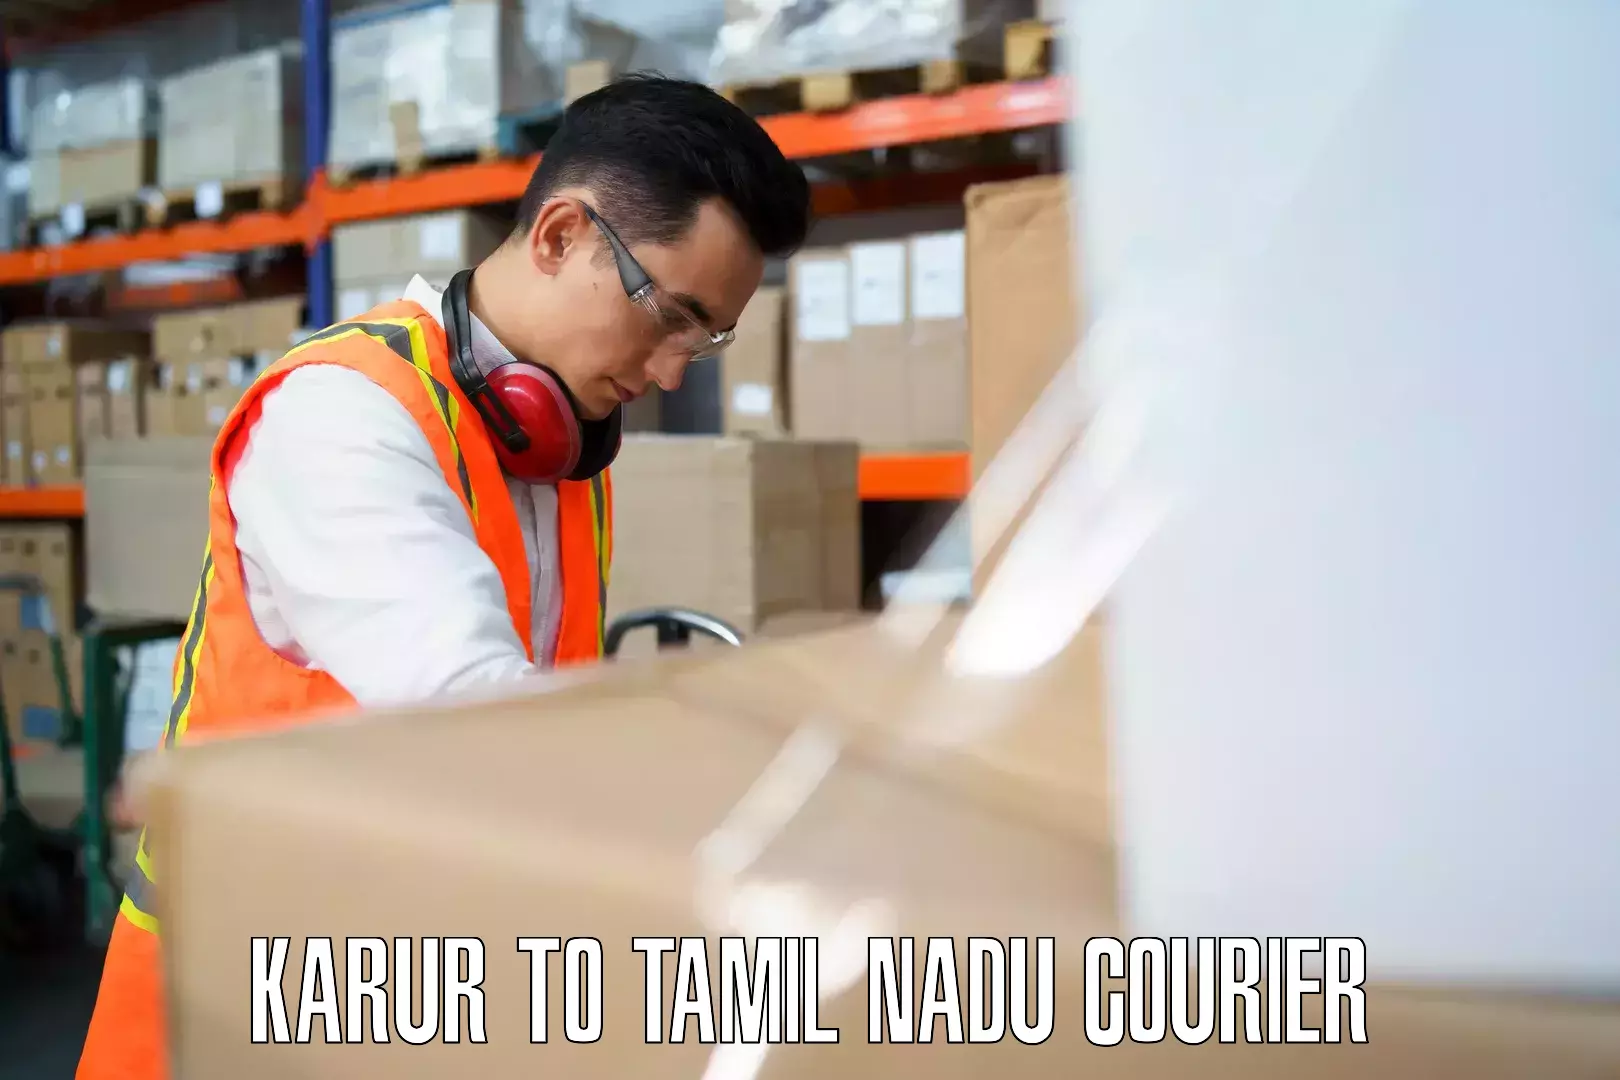 Luggage shipping specialists Karur to Memalur